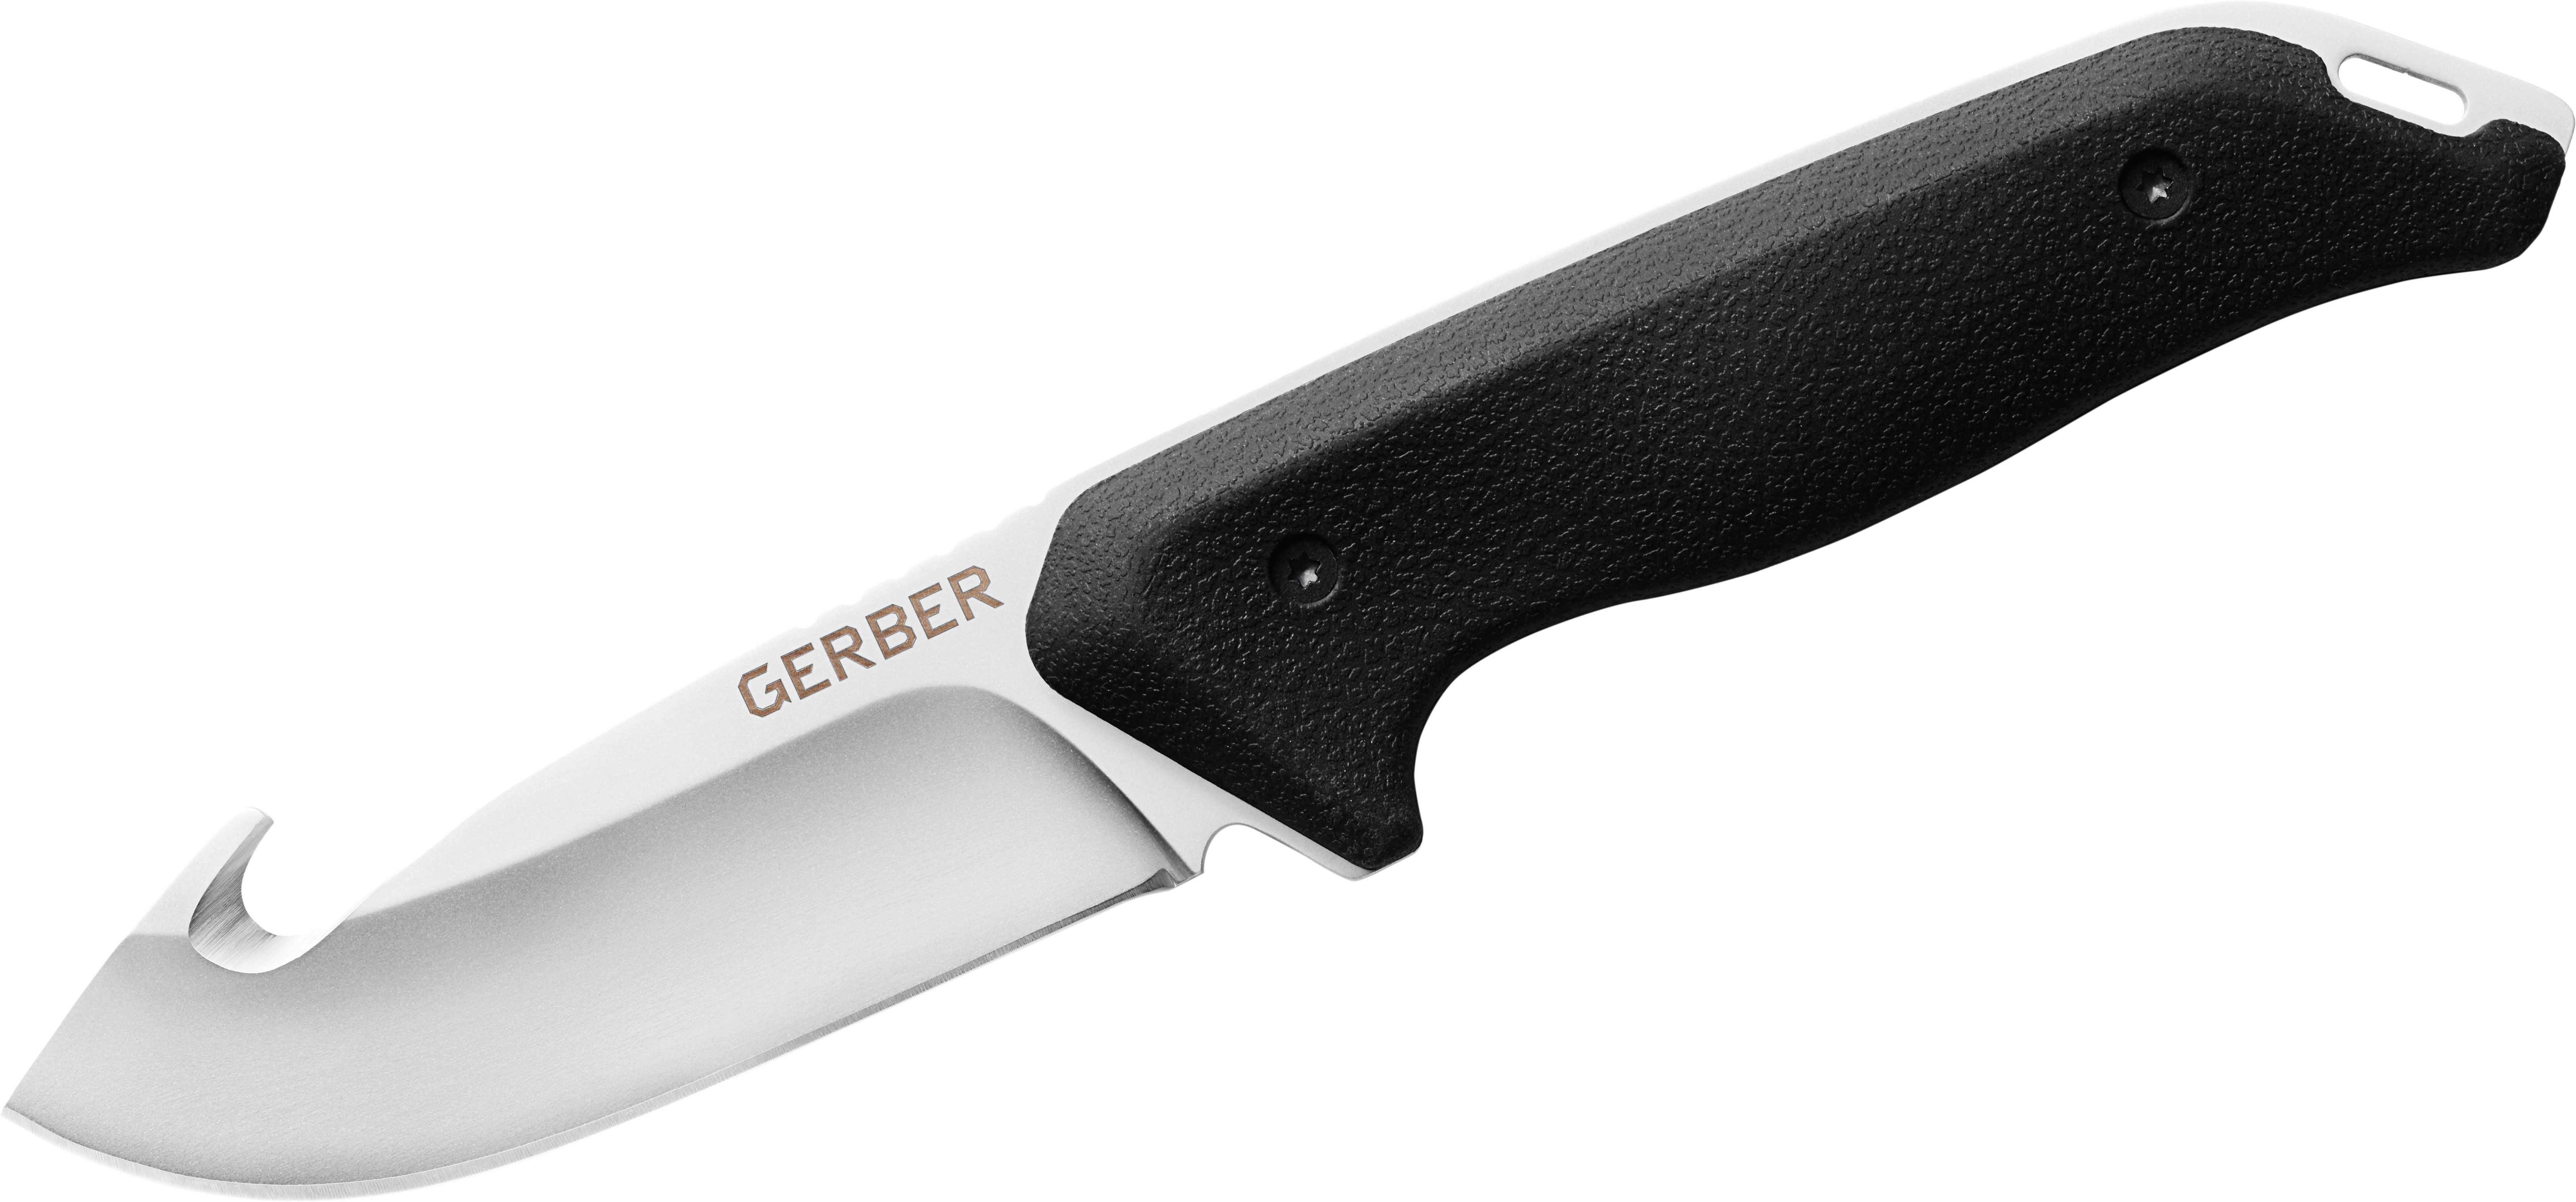 Gerber Moment Large Guthook Fixed 3.6 5Cr15MoV Blade, Nylon